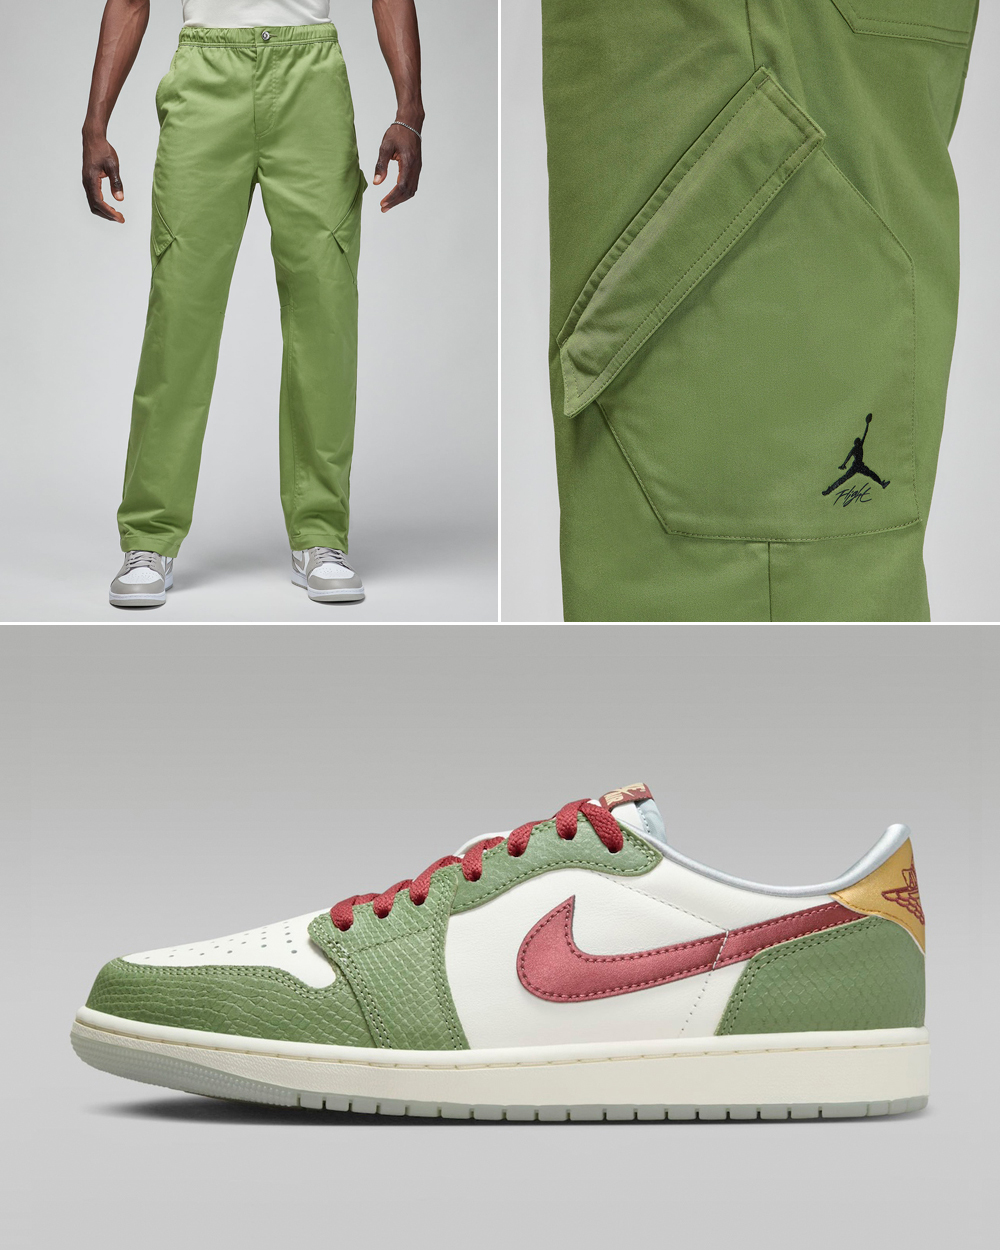 Air-Jordan-1-Low-OG-Year-of-the-Dragon-Chinese-New-Year-Pants-2